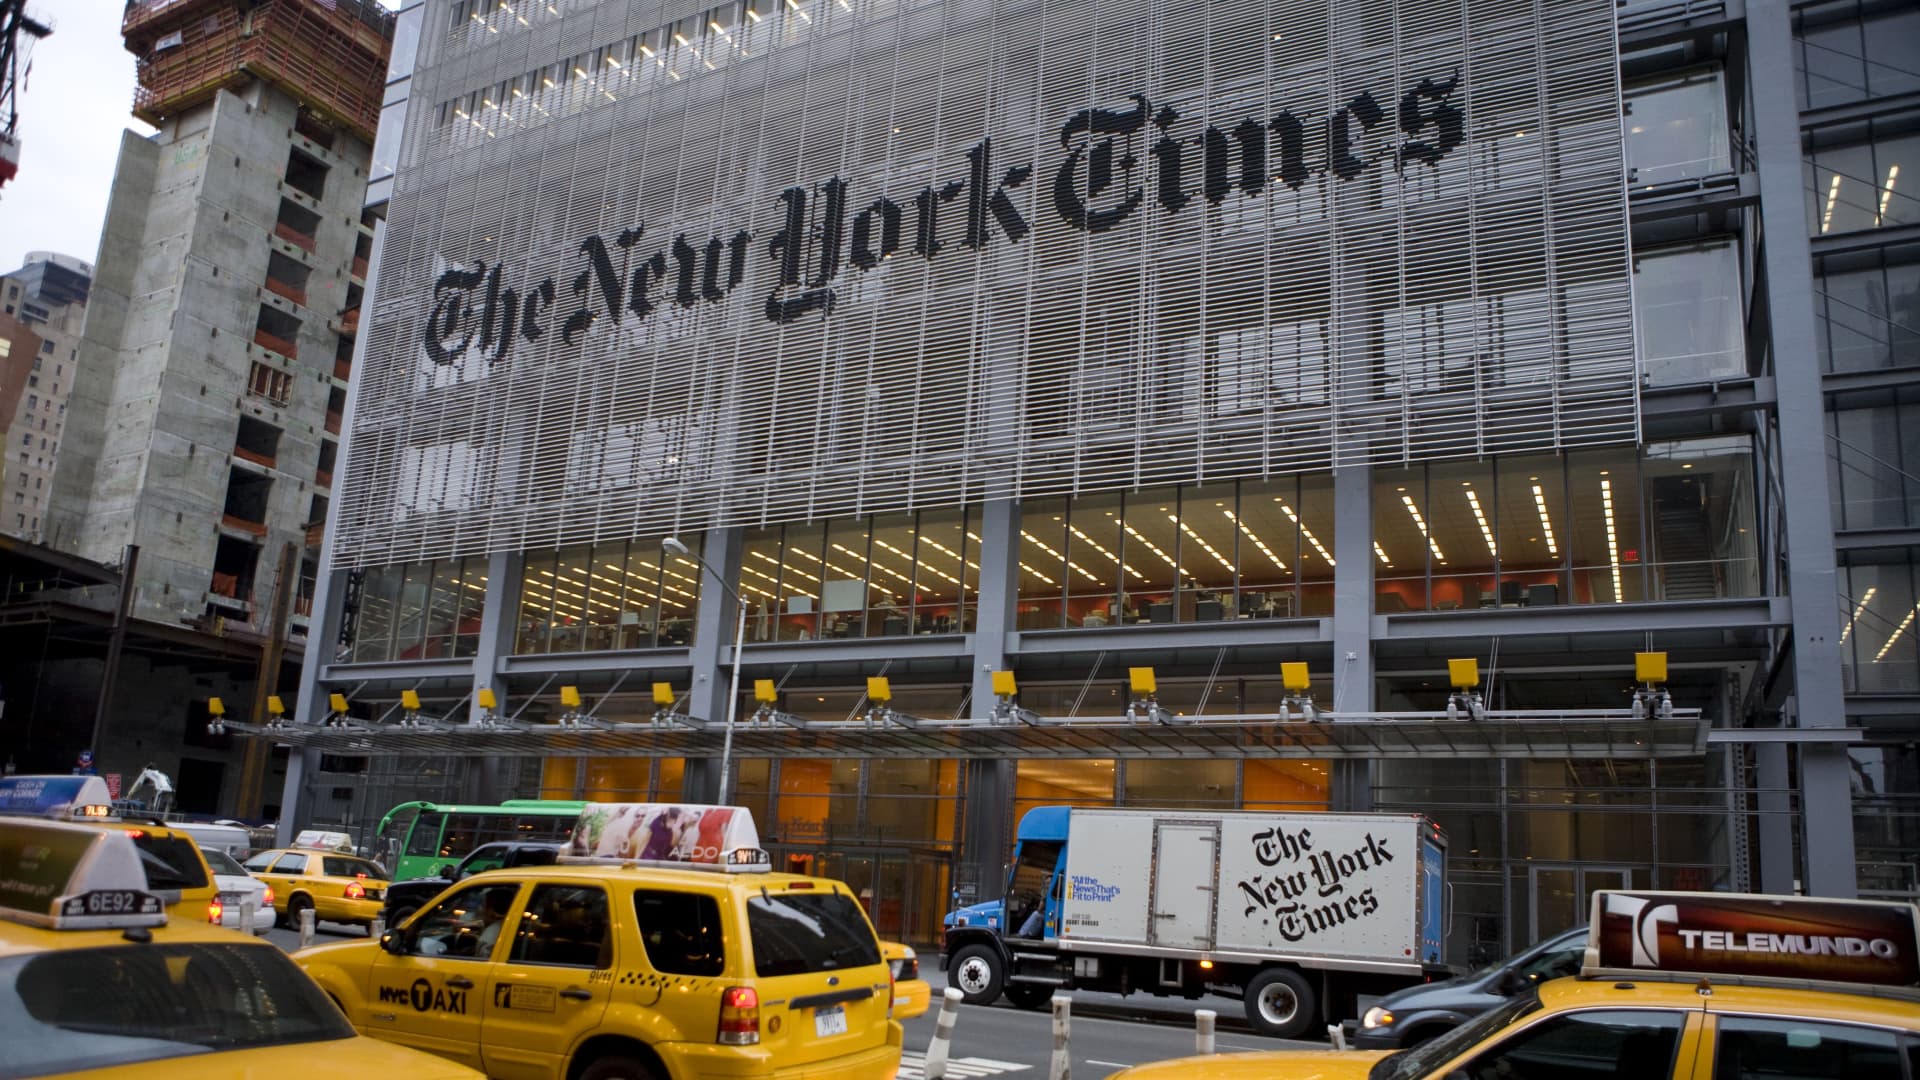 New York Times stock jumps after activist investor ValueAct reveals 6.7% stake